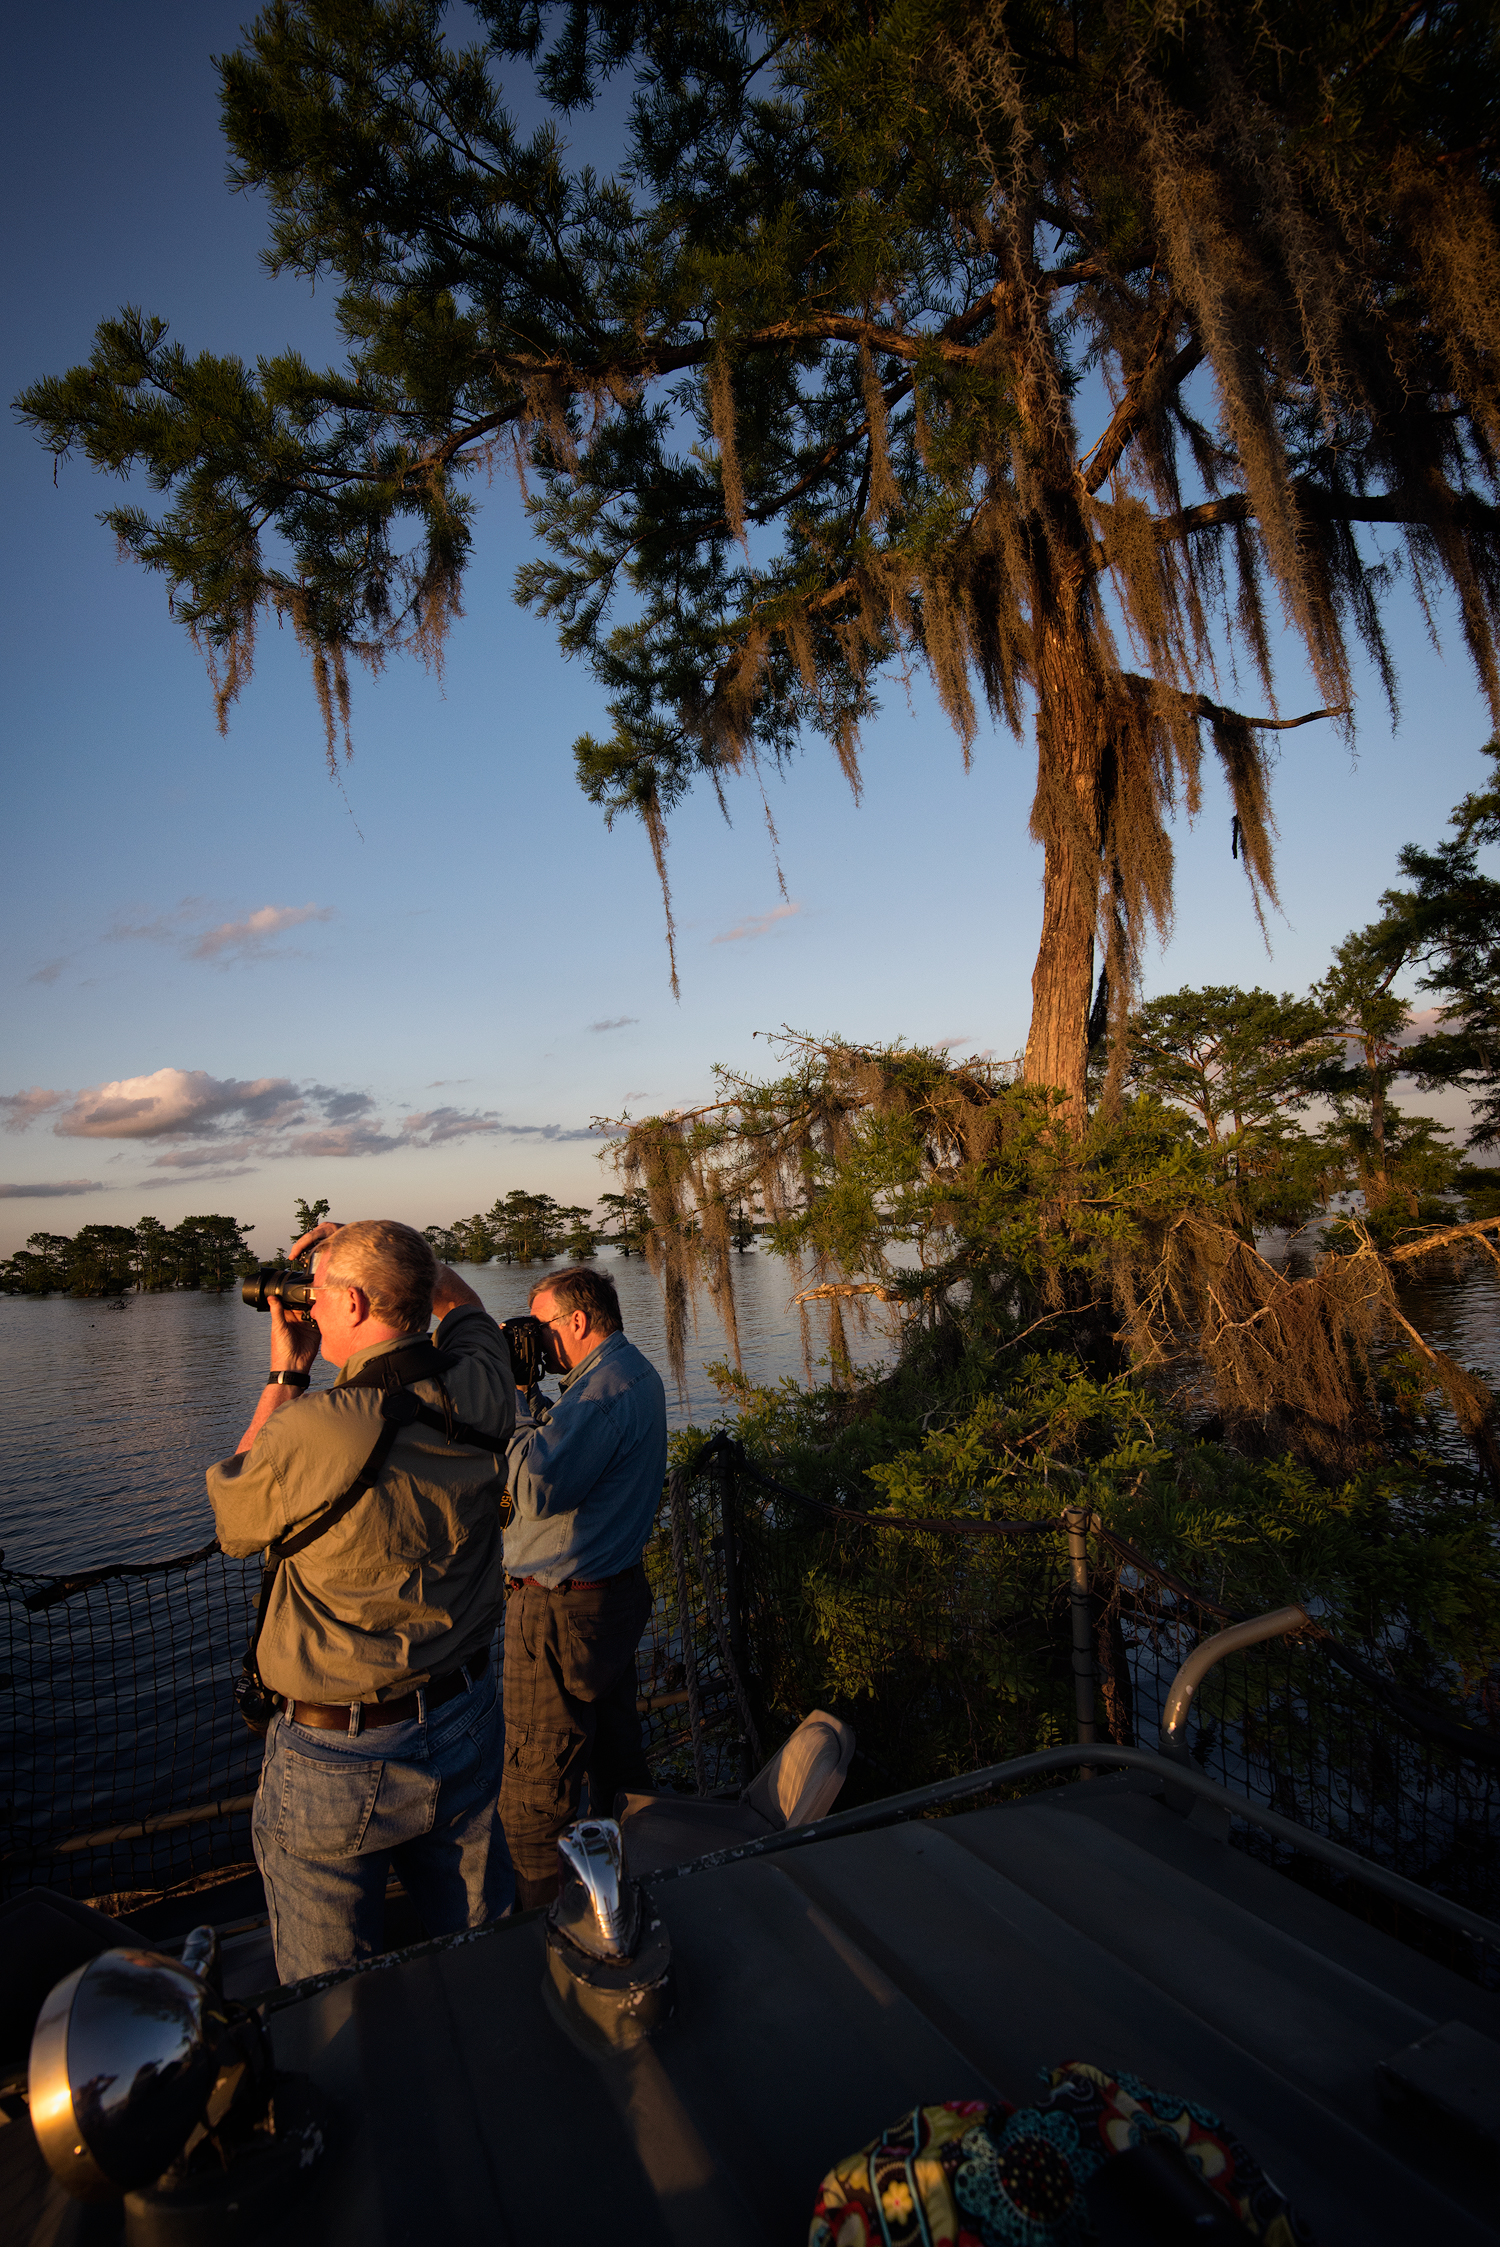 Shooting the Sunset in the Atchafalaya Basin